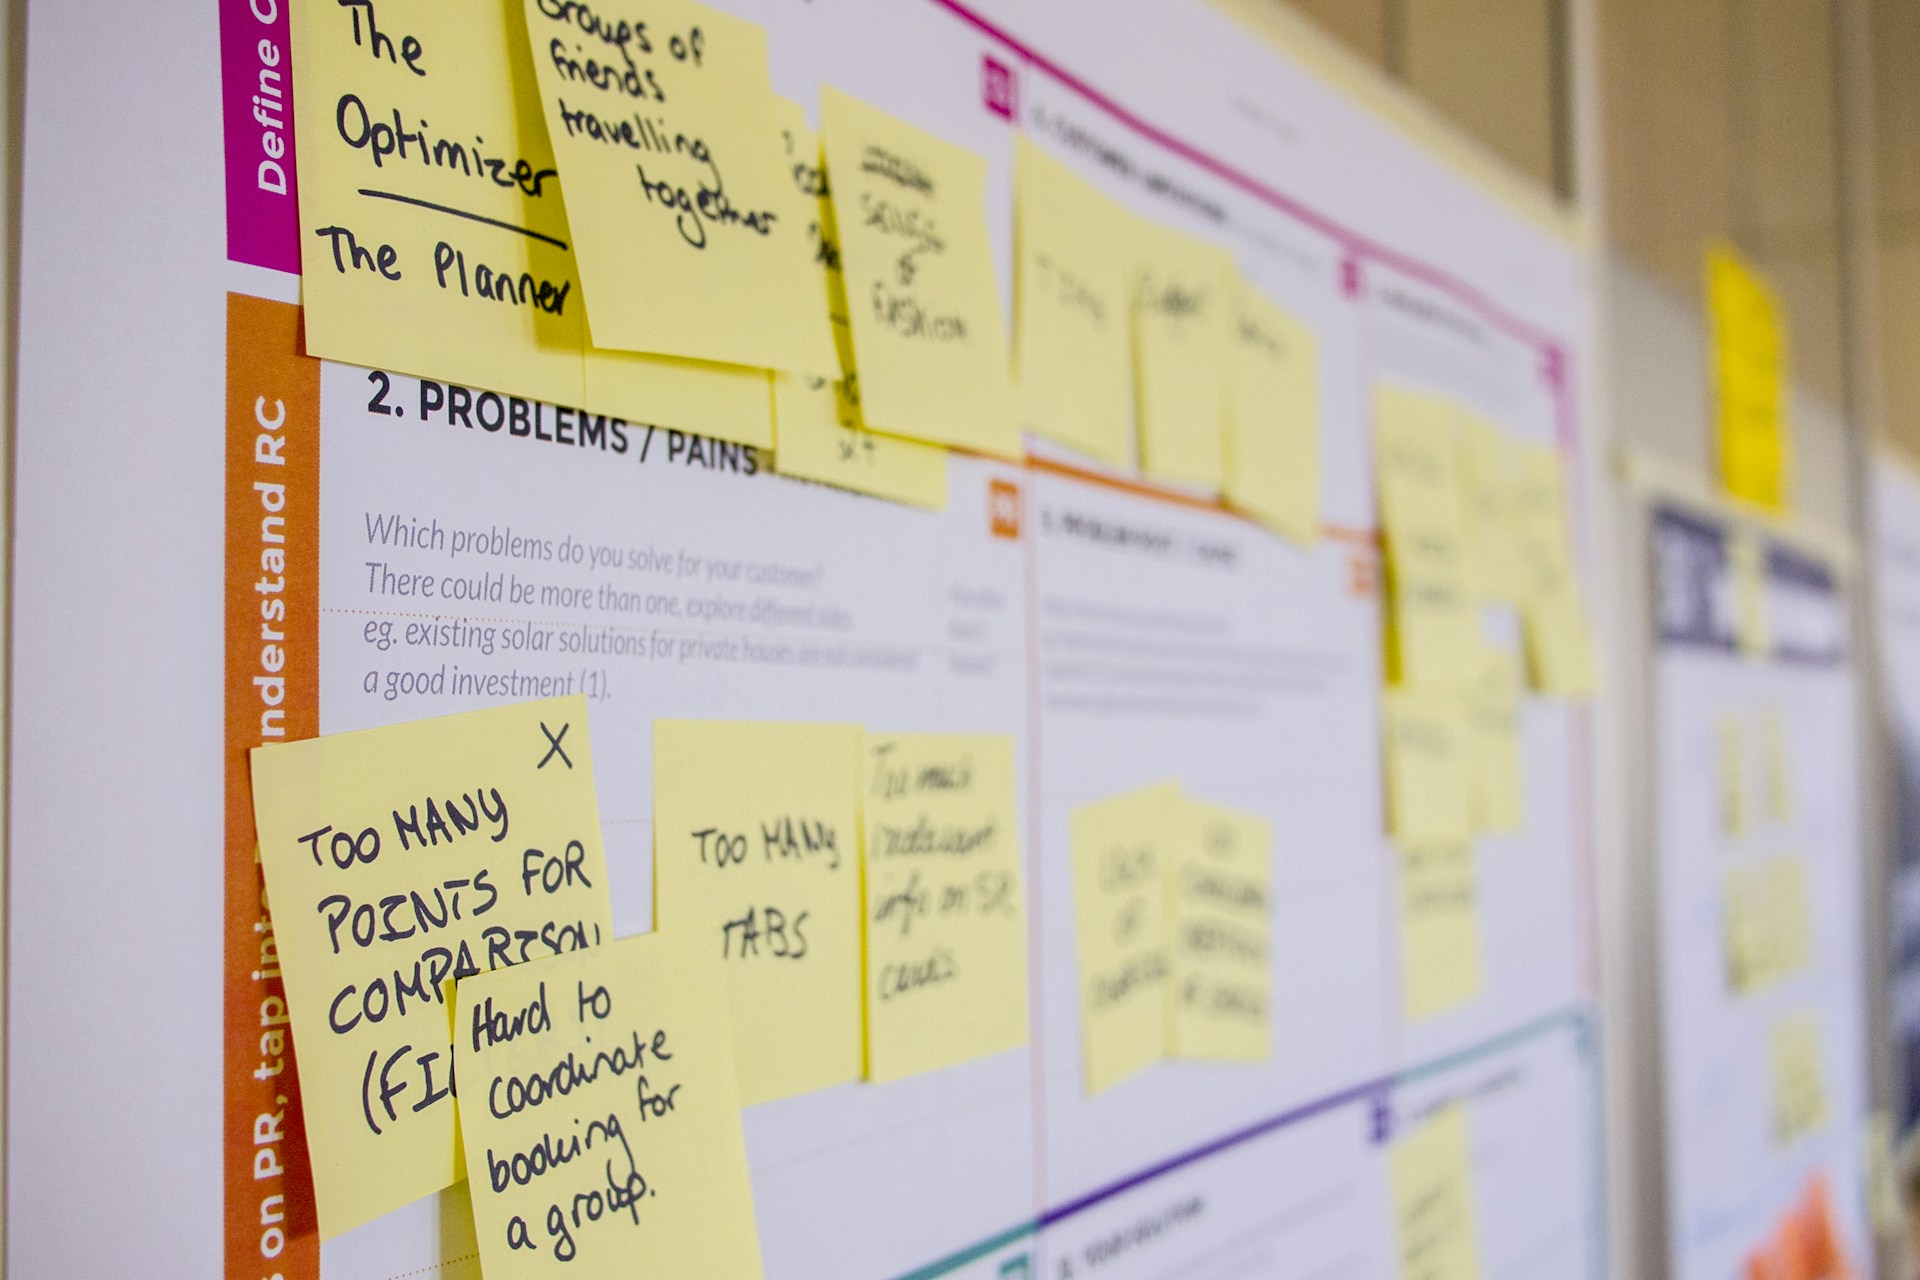 Bright yellow Post-it notes adorn the walls, capturing digital planner ideas and planning sessions that shape the brand's social portfolio